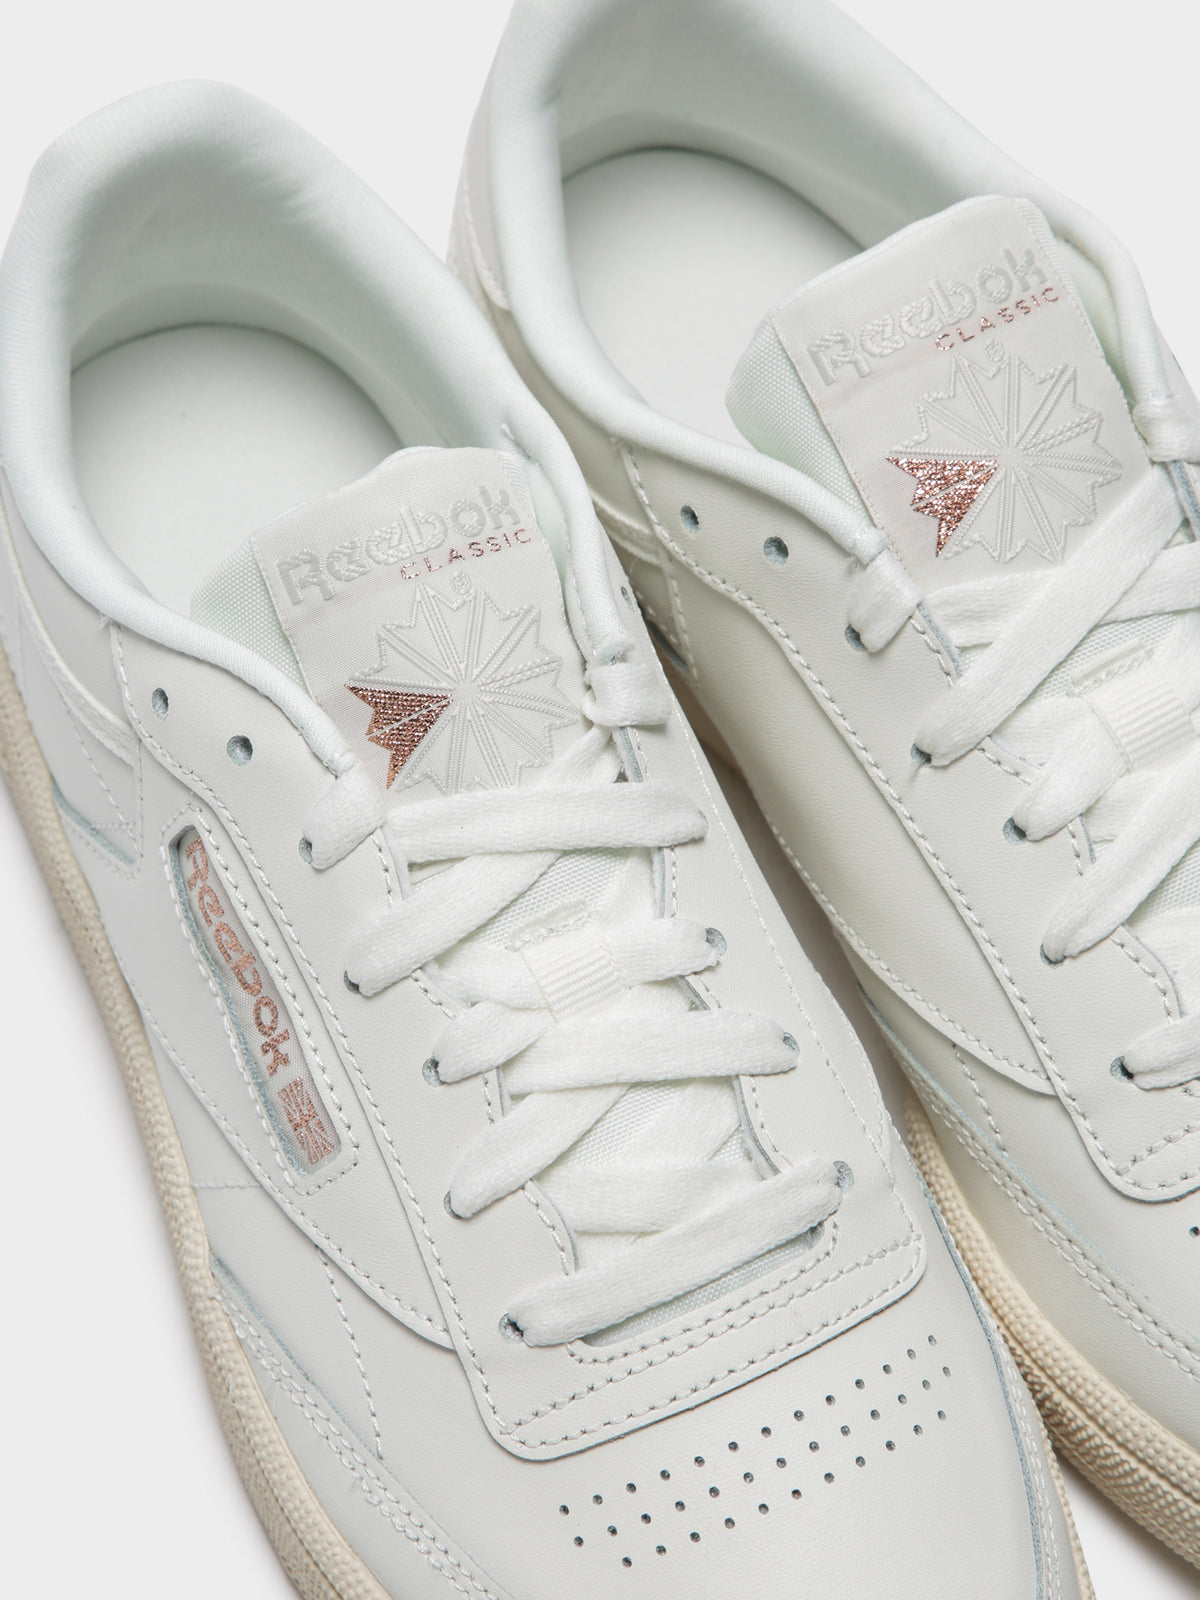 Womens Club C 85 Sneakers in White and Rose Gold